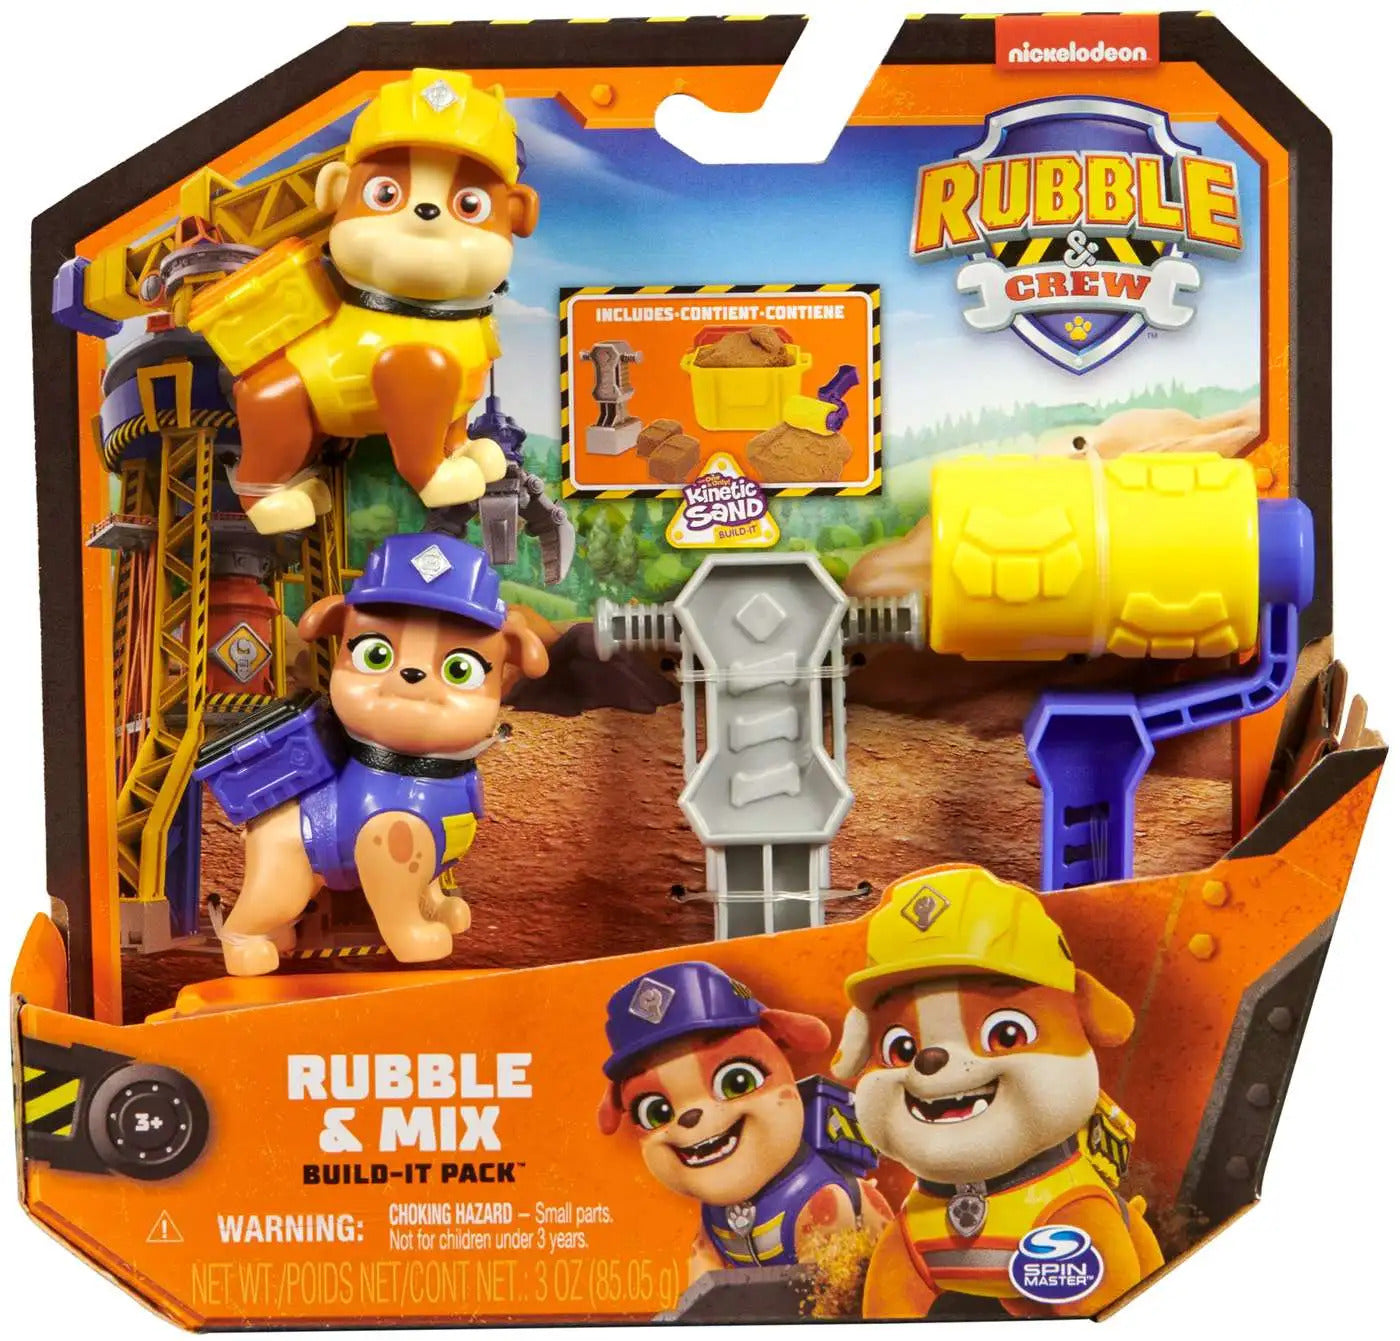 RUBBLE & CREW - RUBBLE AND MIX BUILD-IT TWO PACK